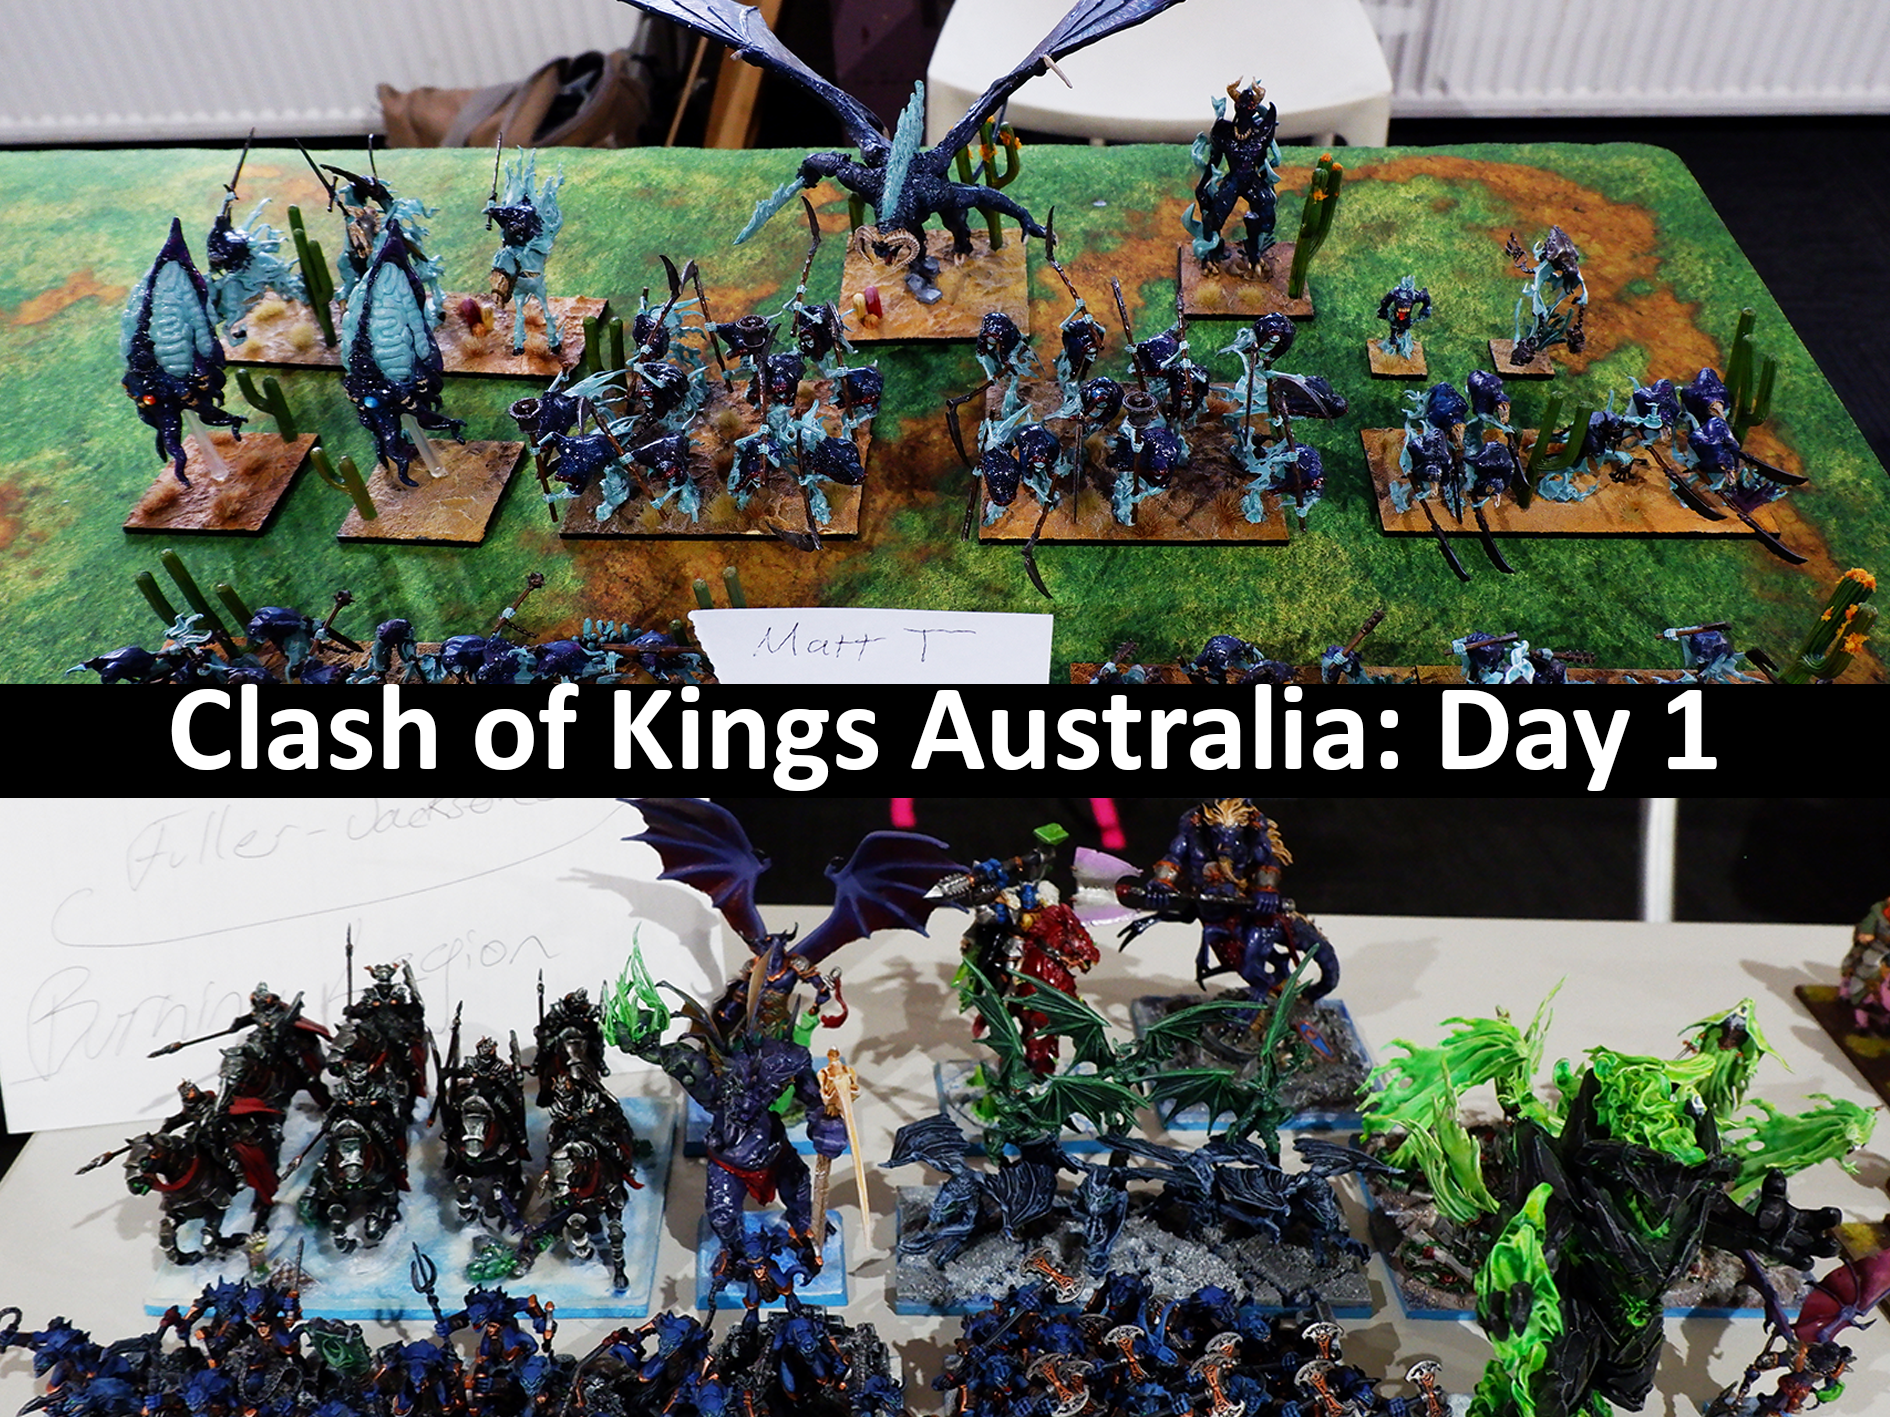 Clash of Kings - My lord, do you have any plans for the weekend